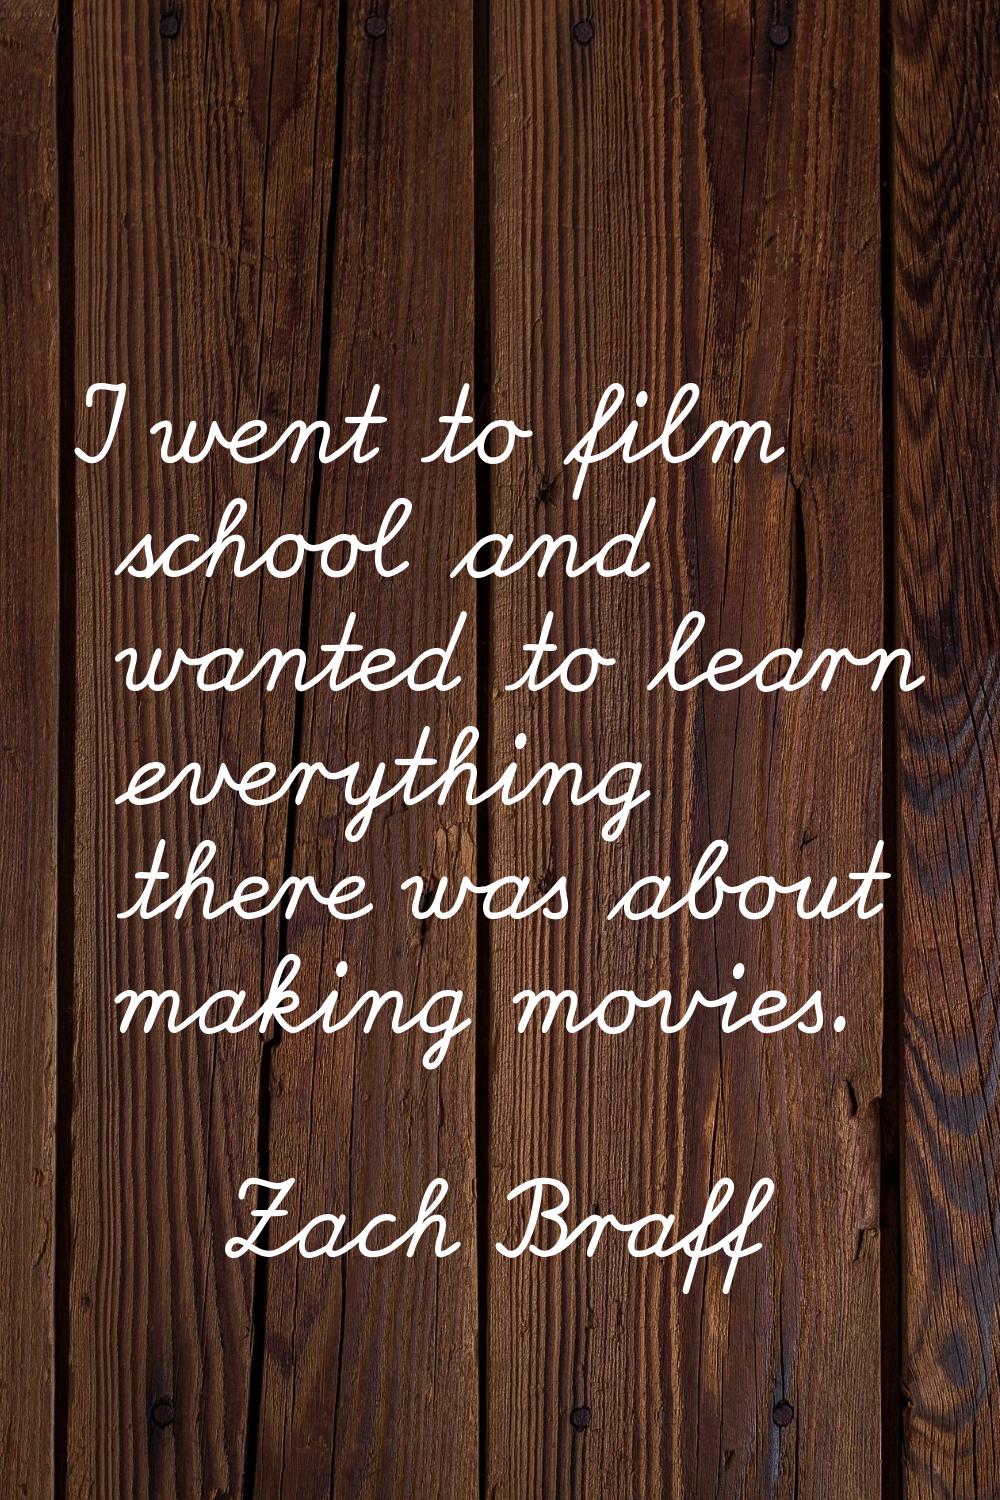 I went to film school and wanted to learn everything there was about making movies.